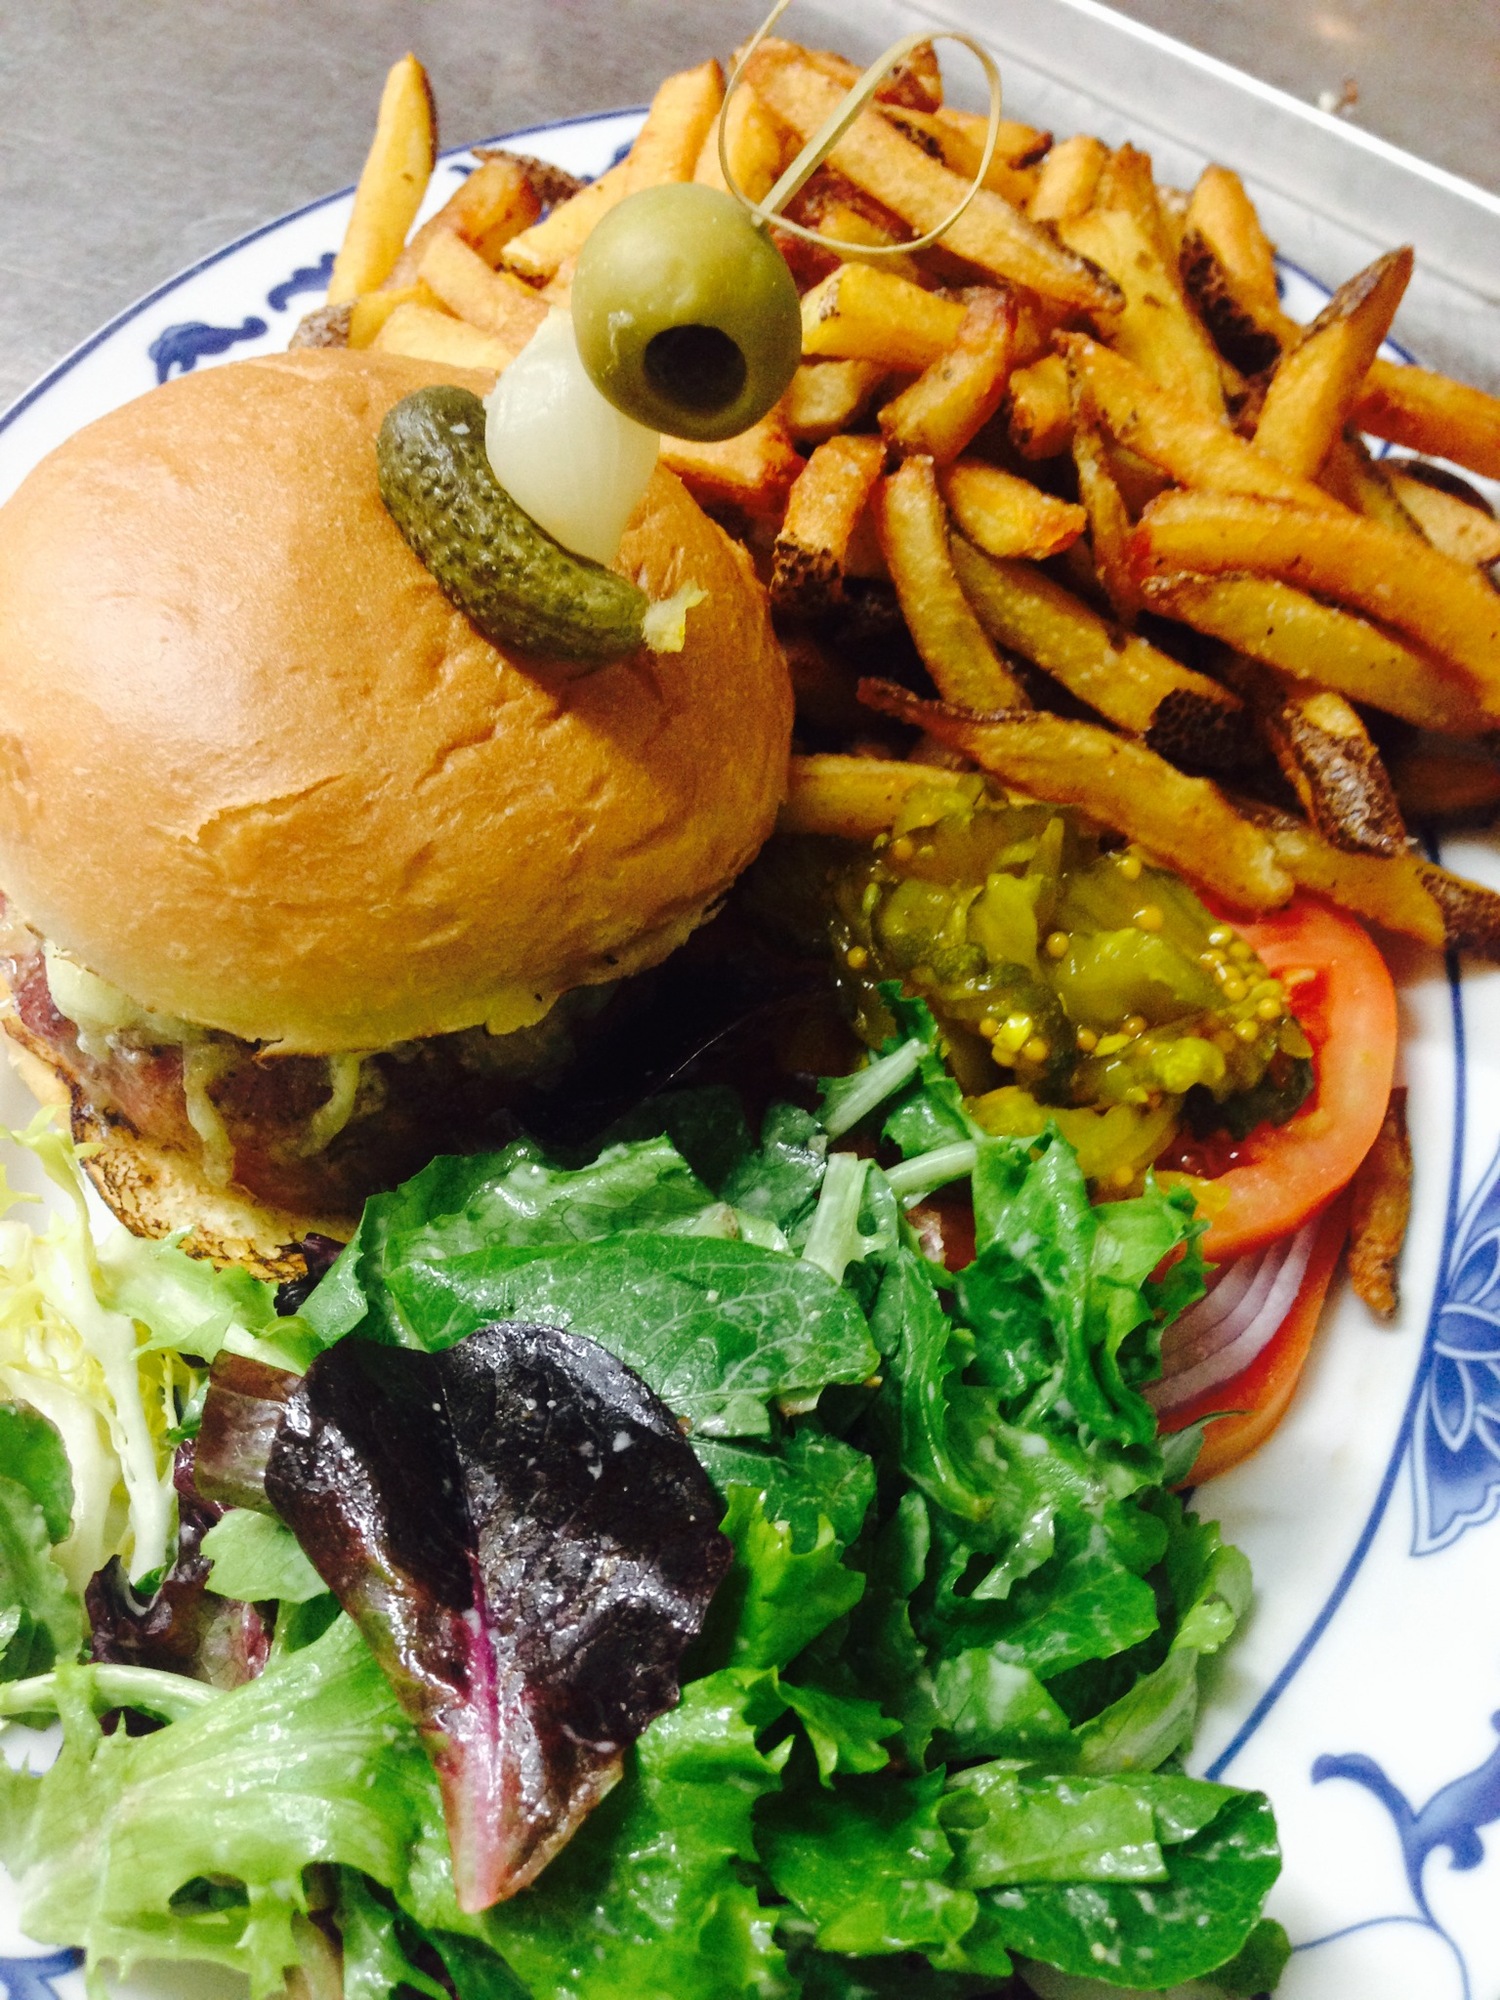 Almond Restaurant has new winter specials, including on Tuesdays when a burger and beer is $25. COURTESY ALMOND